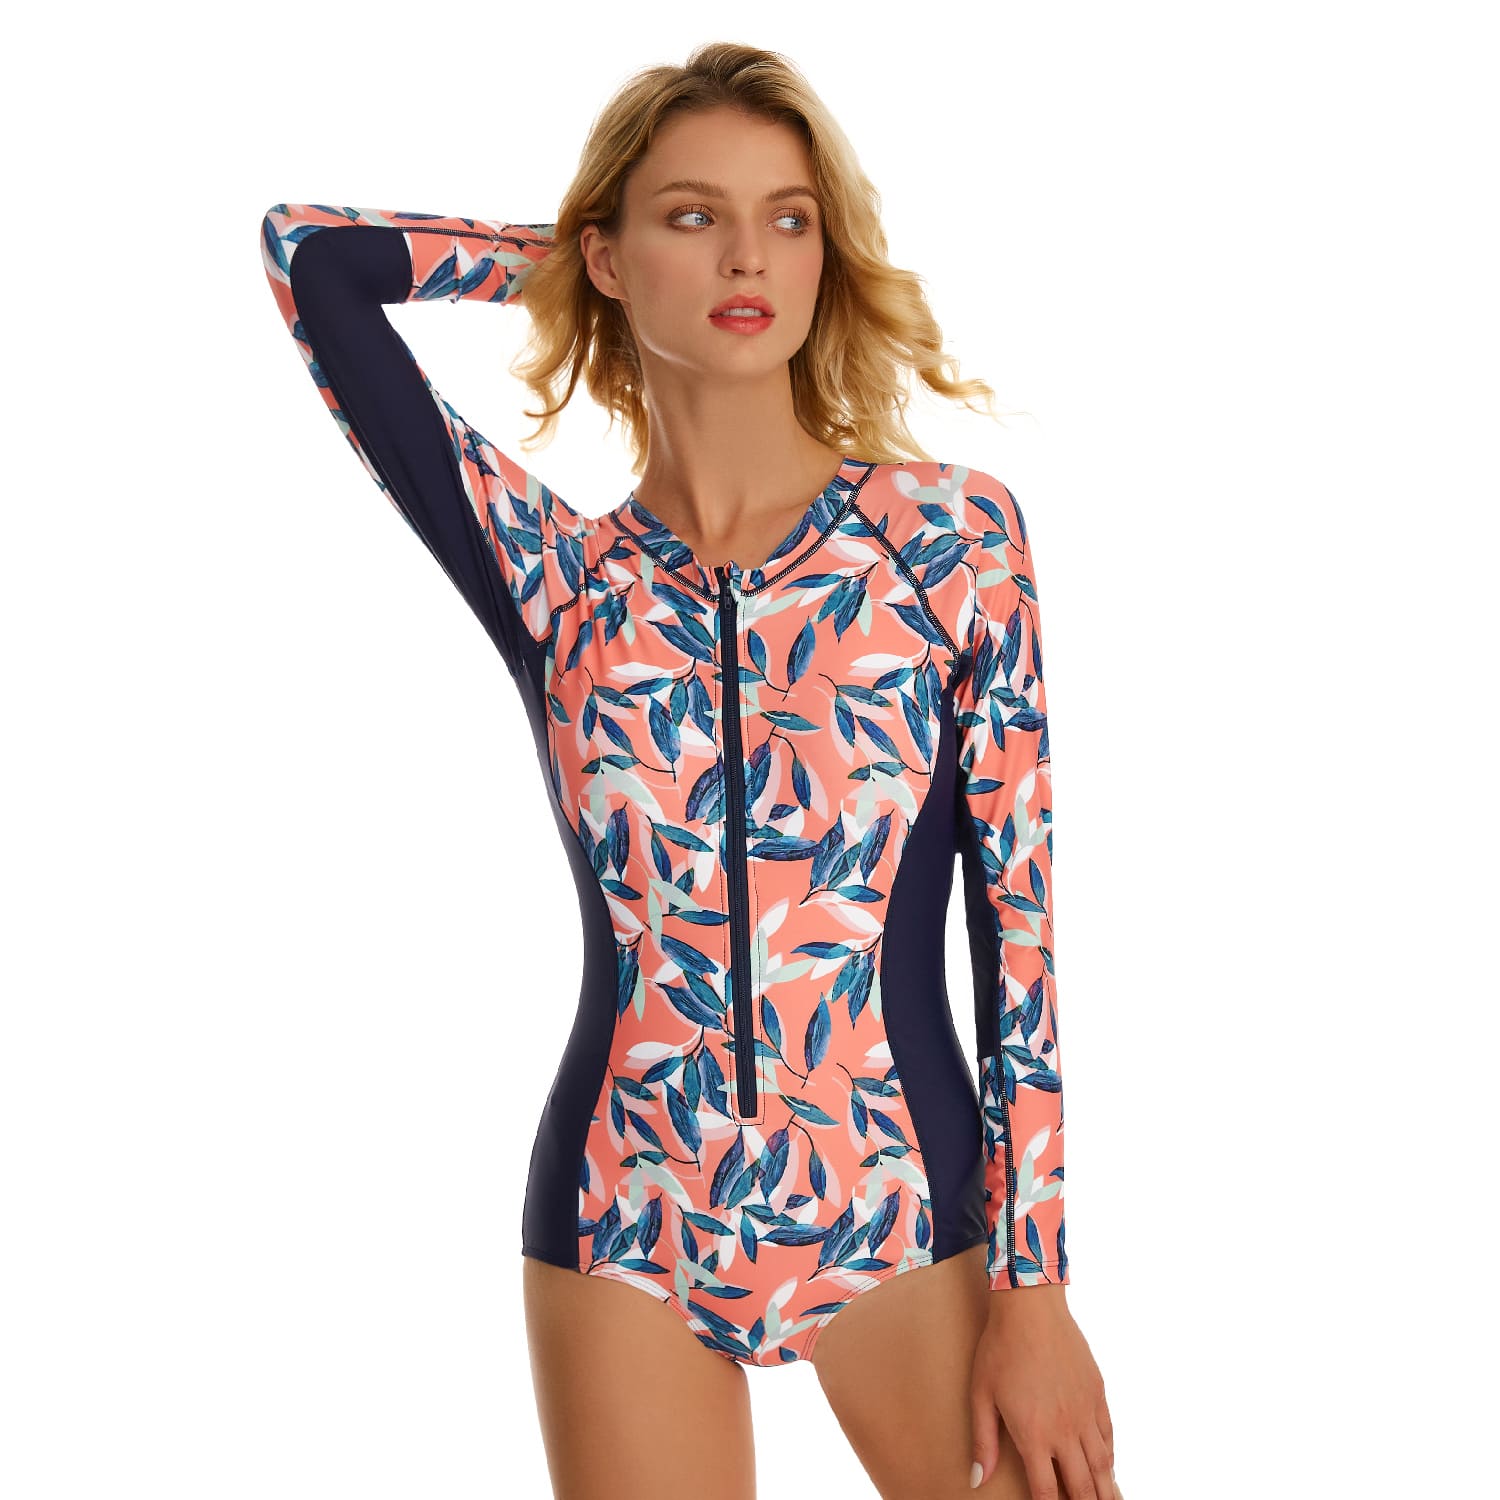 Floral Printed Swimsuit Long Sleeve Swimming Suit